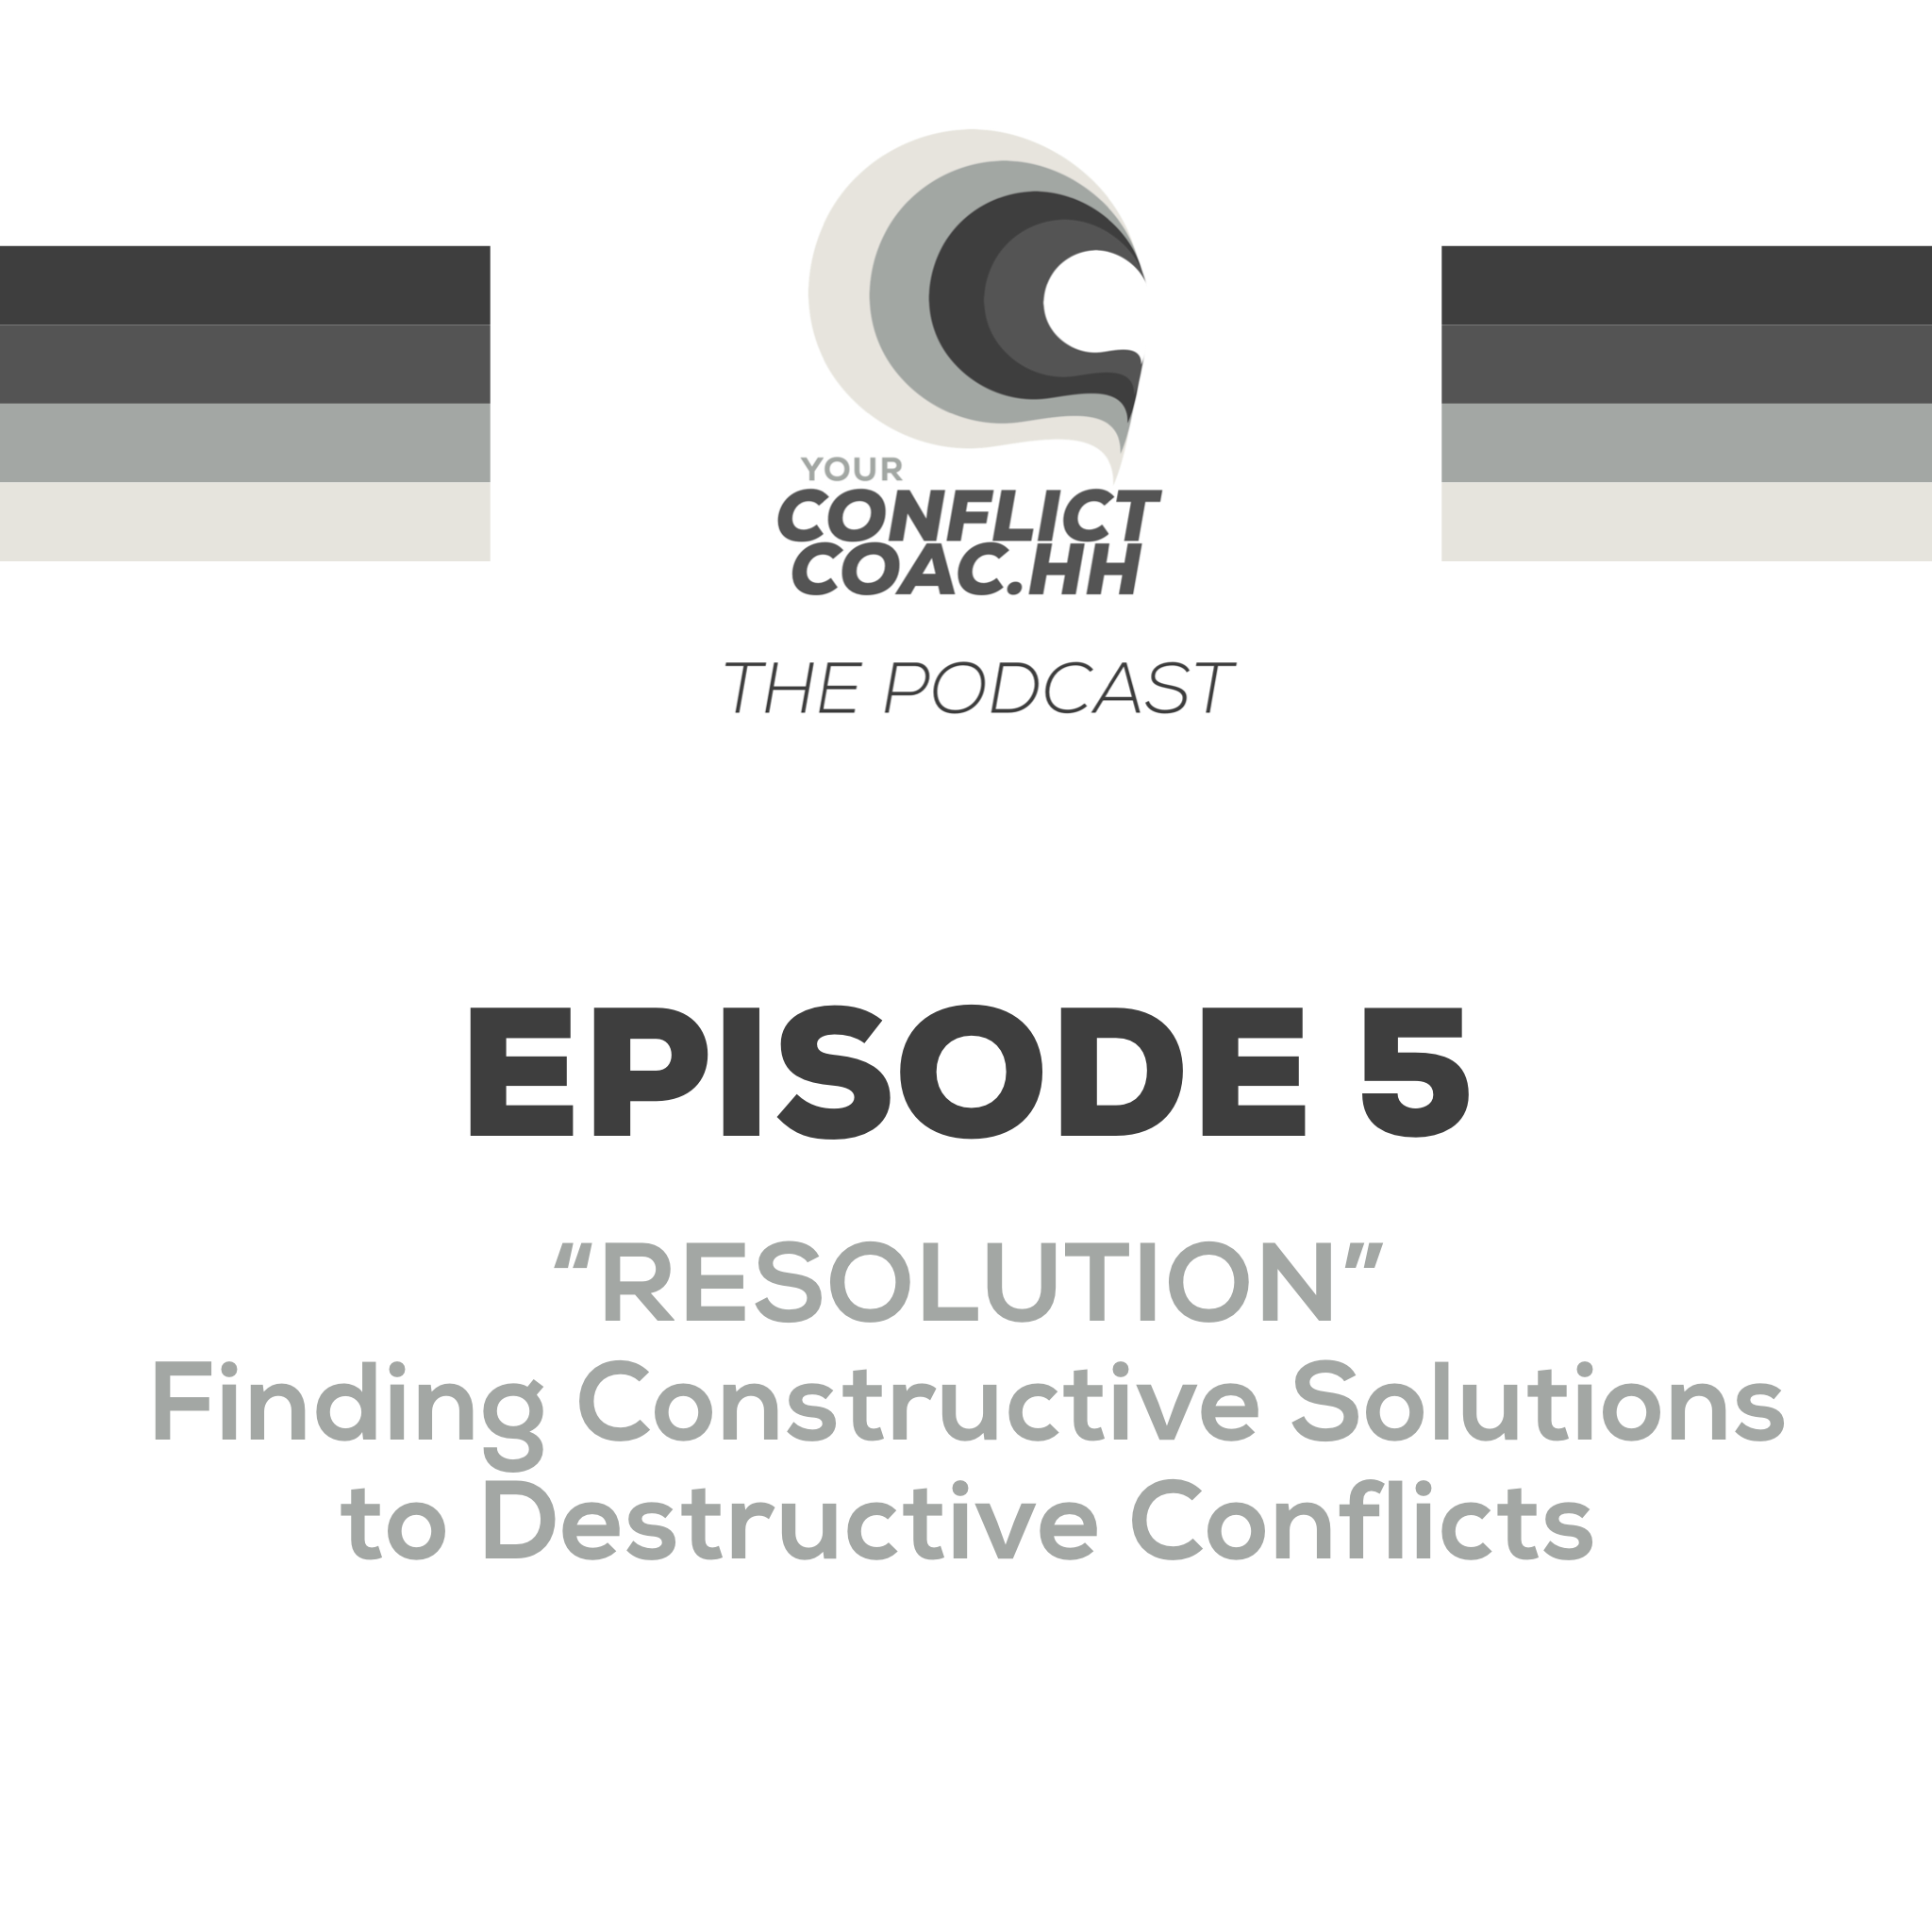 RESOLUTION - Finding Constructive Solutions to Destructive Conflicts